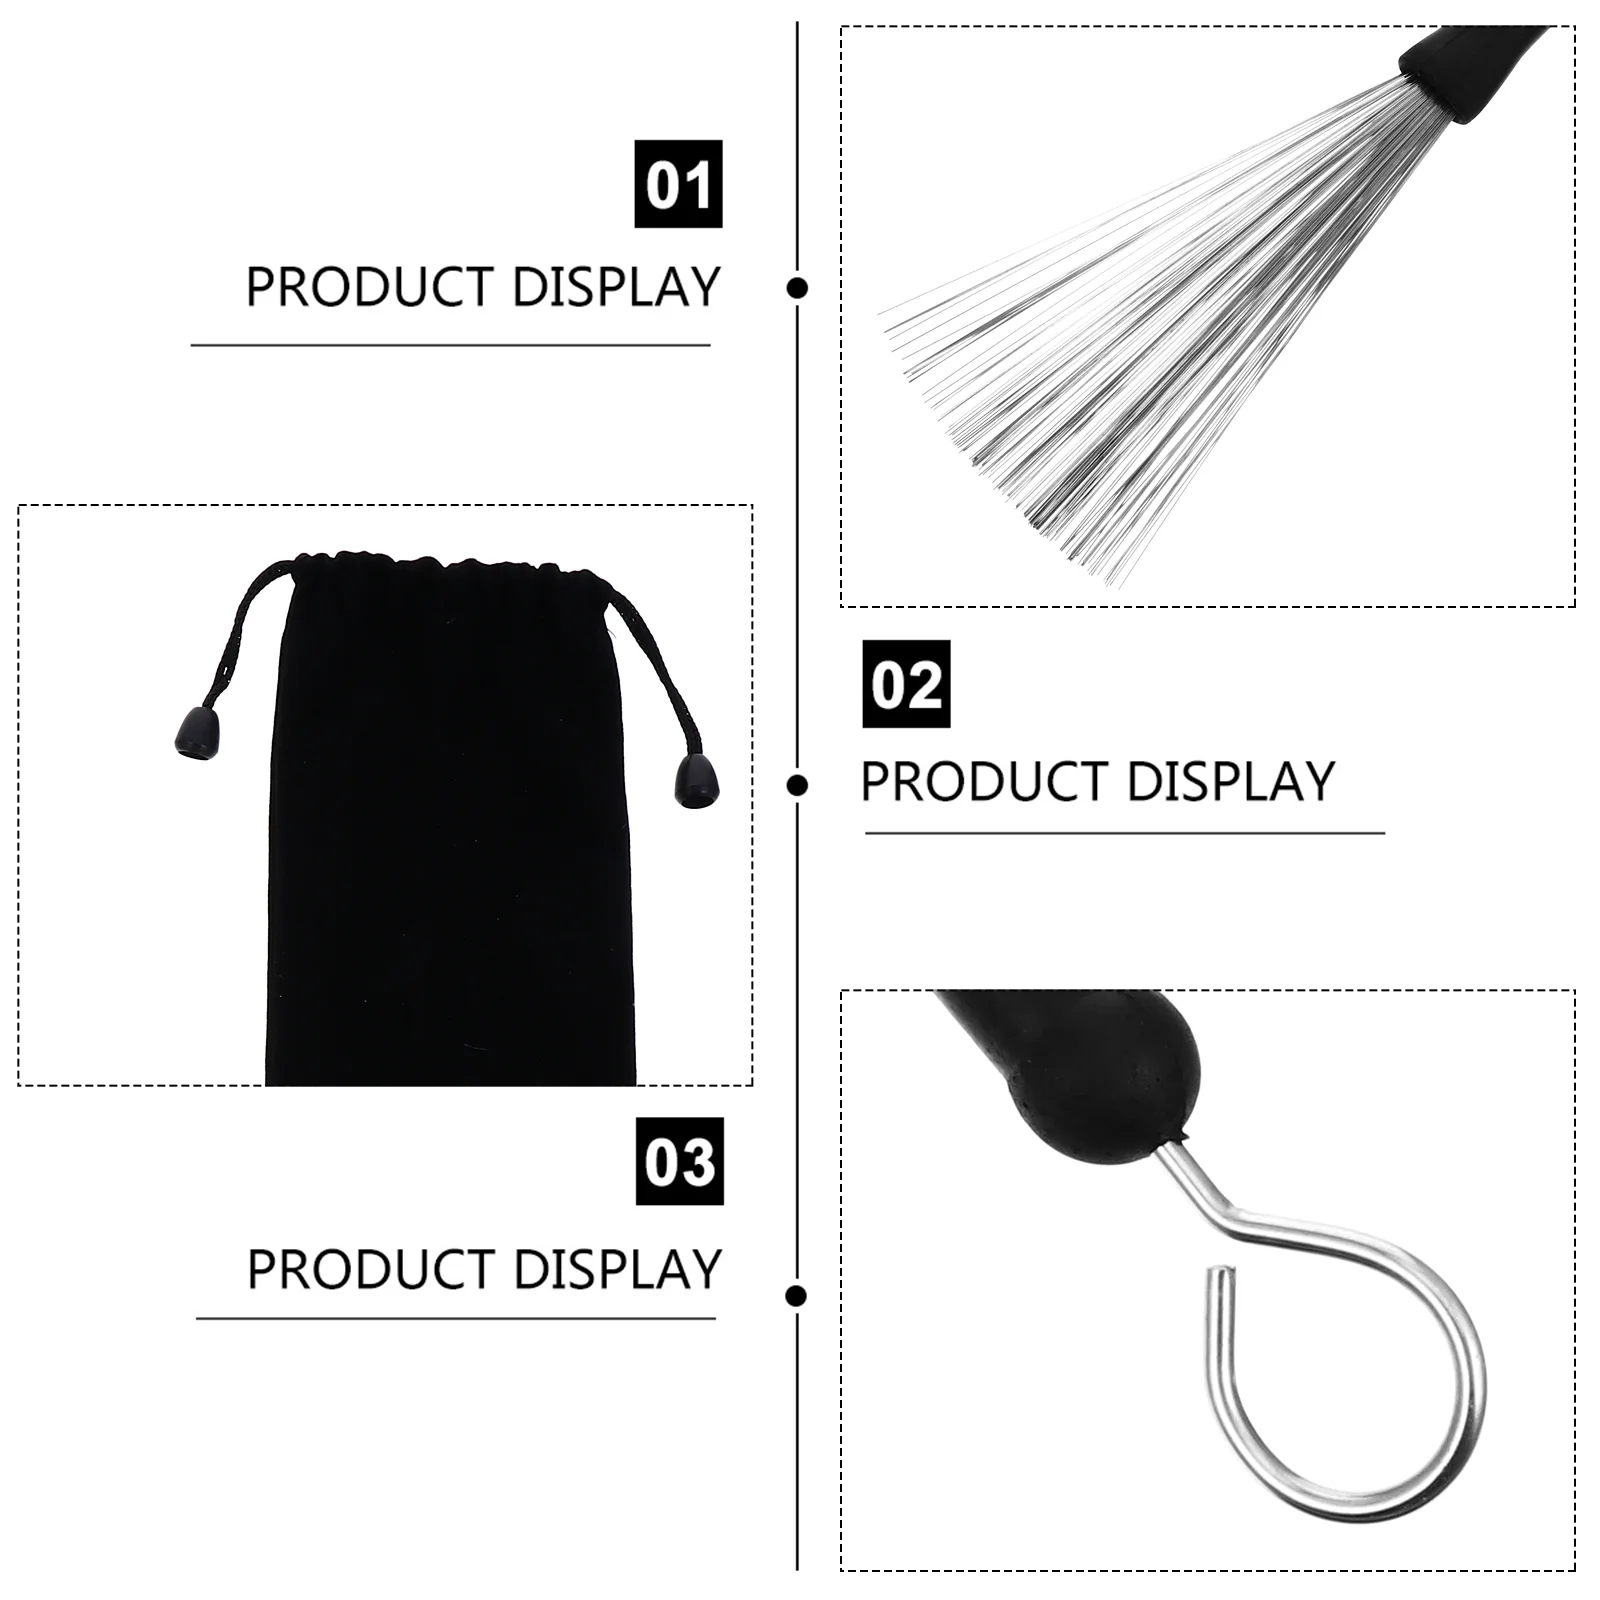 Retractable Drum Wire Brushes Percussion Brush Drum Cleaning Kit Drums Sticks Drum Brushes Wire Drum Brush Retractable Drumstick enlarge